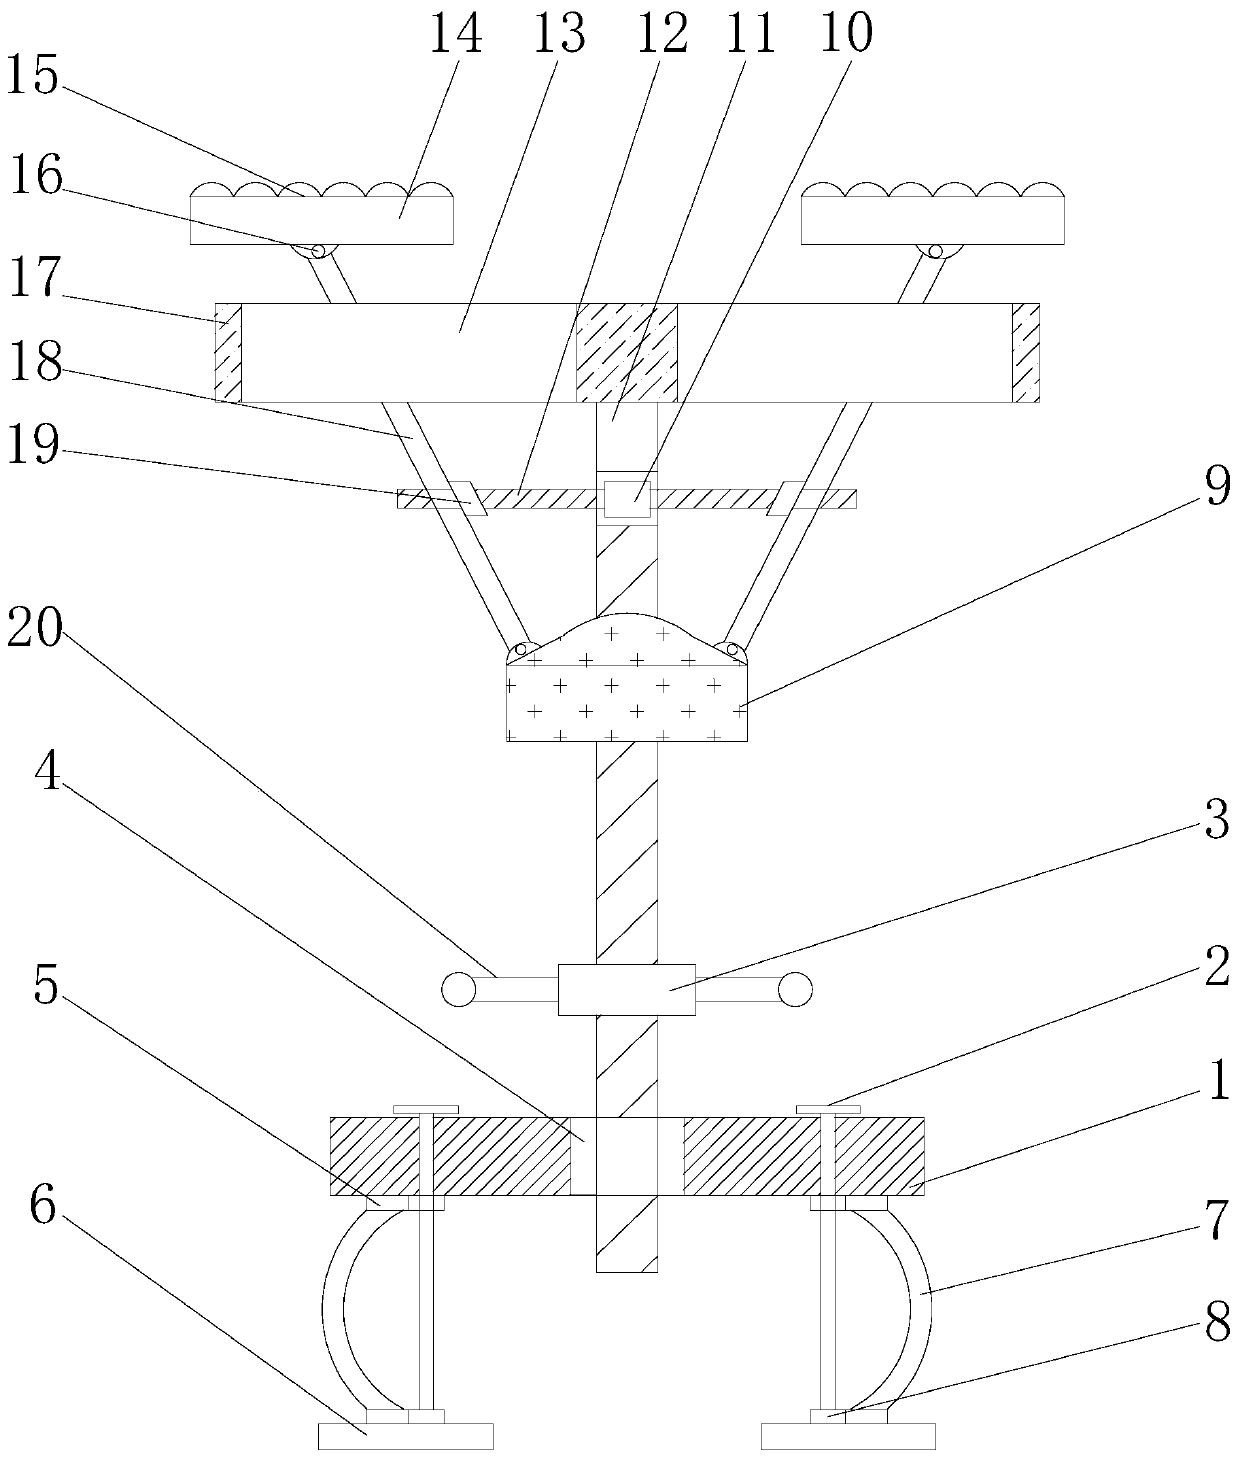 Supporting device of building structure